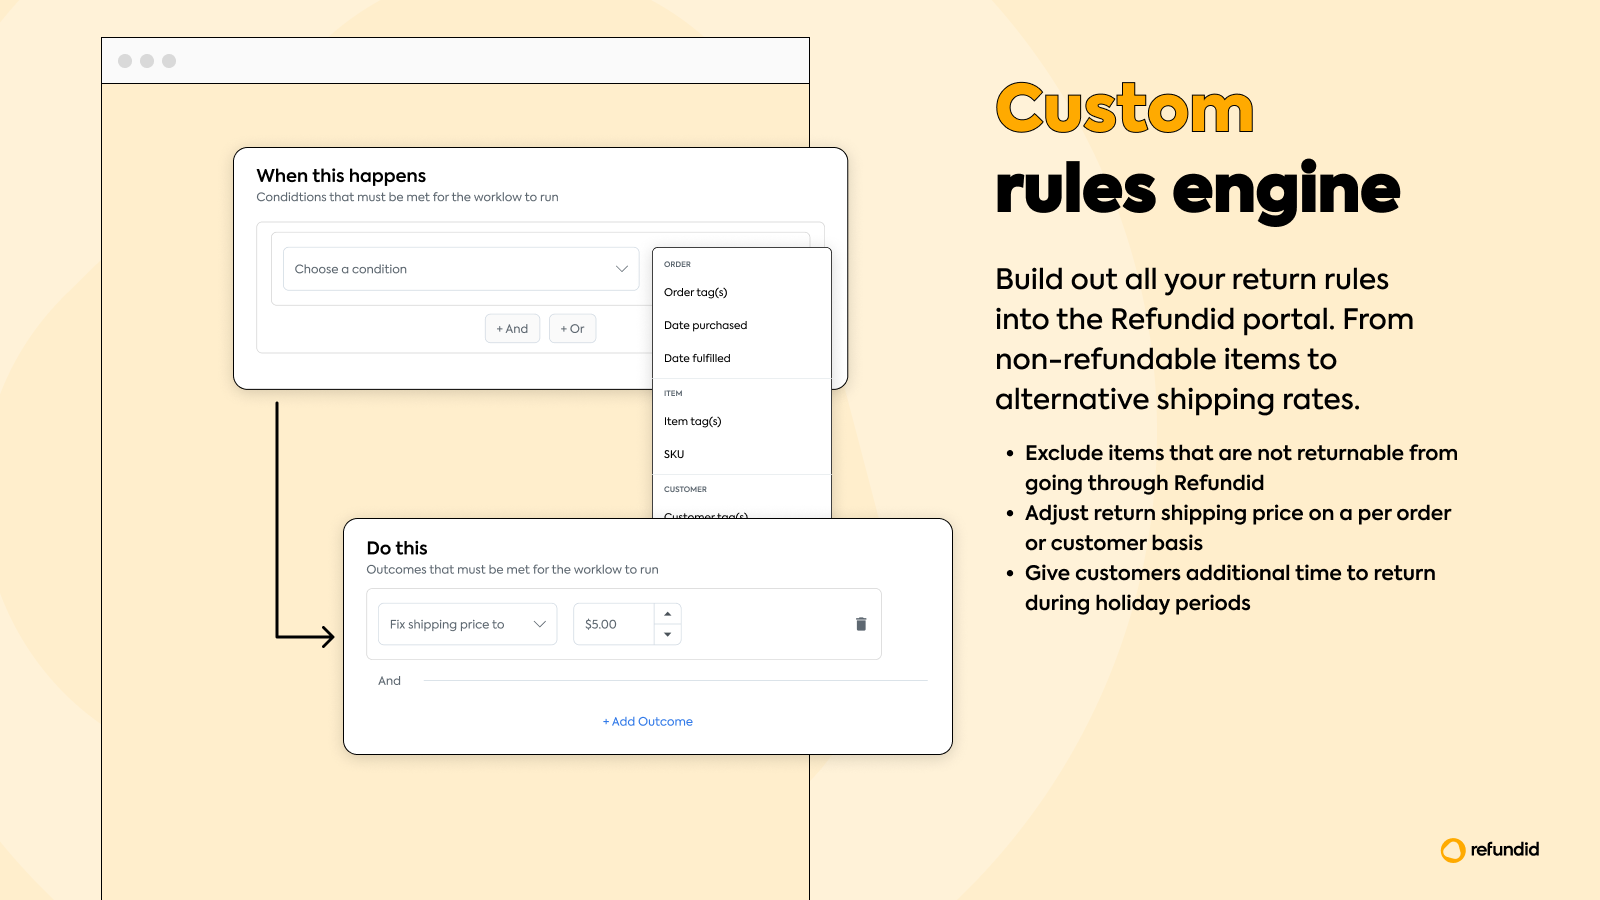 Embed your return rules into the customer experience